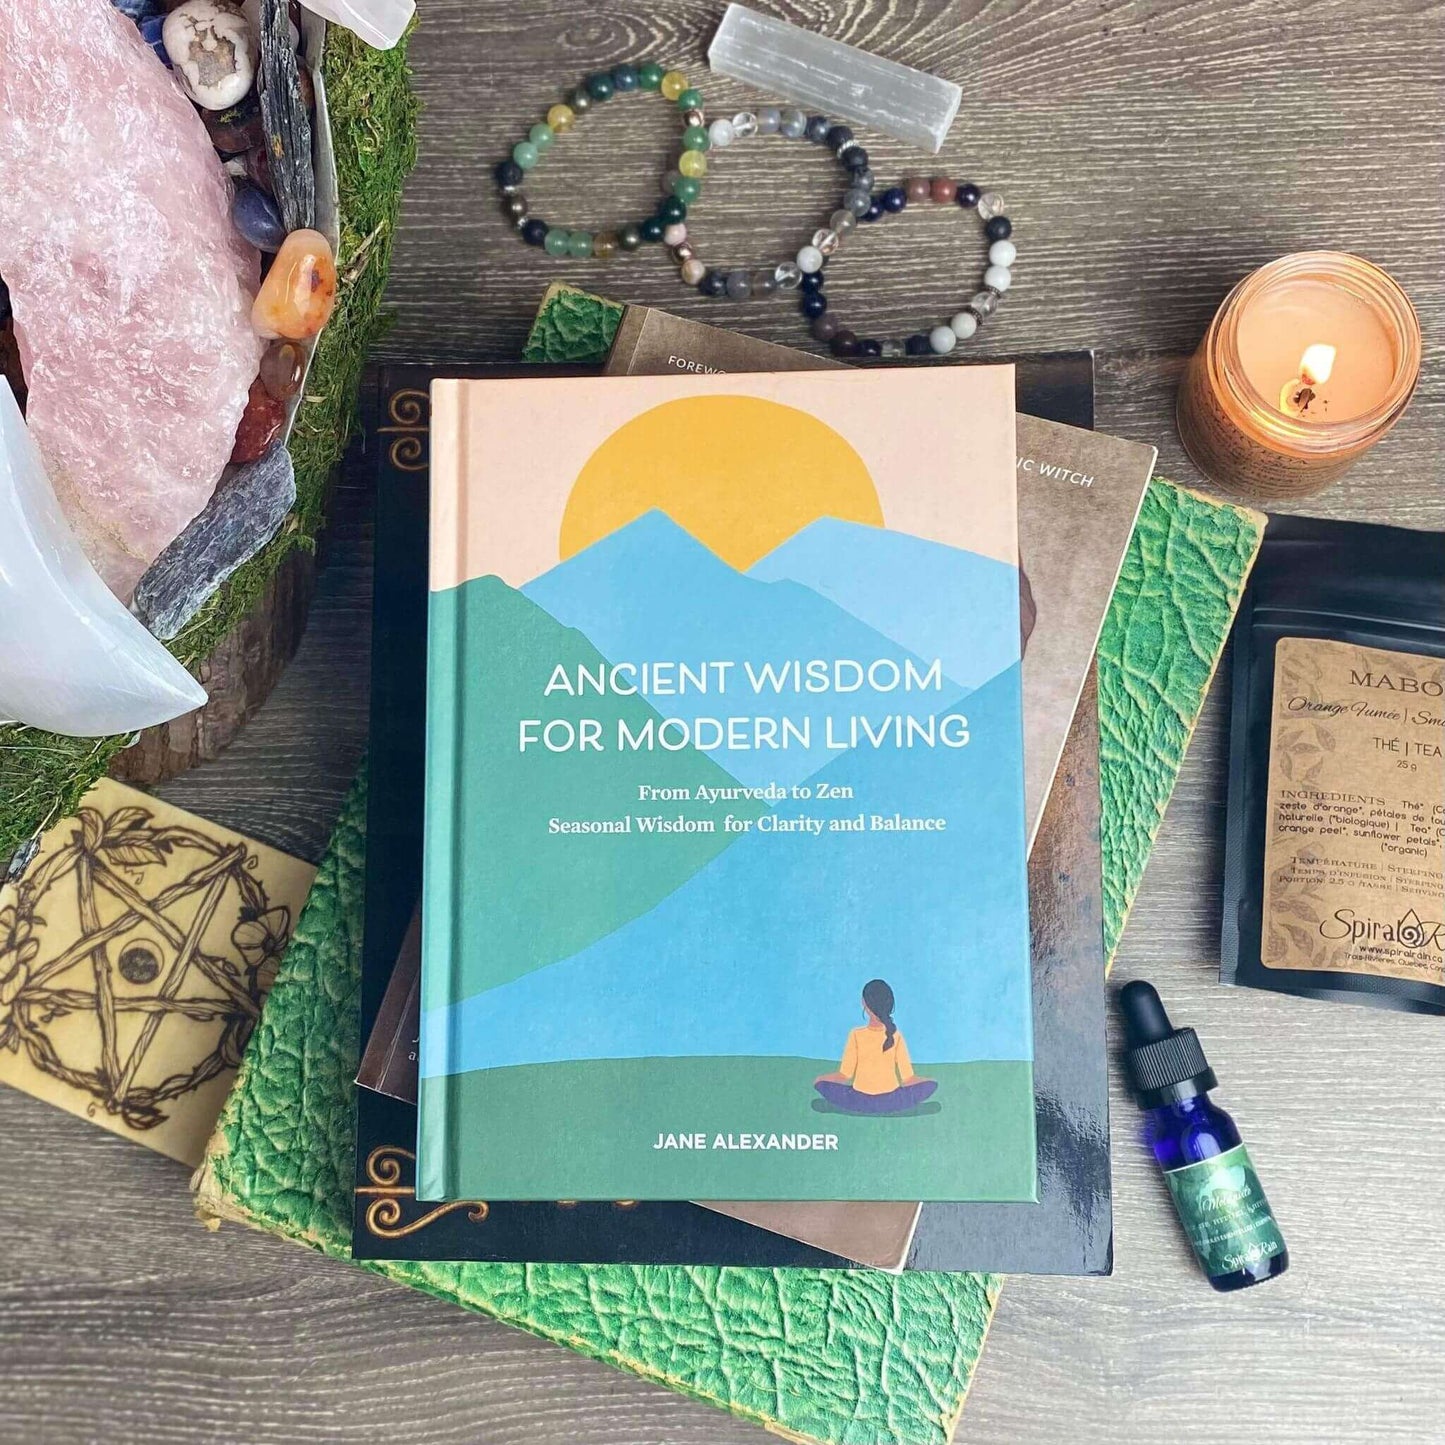 ANCIENT WISDOM FOR MODERN LIVING: FROM AYURVEDA TO ZEN, SEASONAL WISDOM FOR CLARITY AND BALANCE at $24.5 only from Spiral Rain